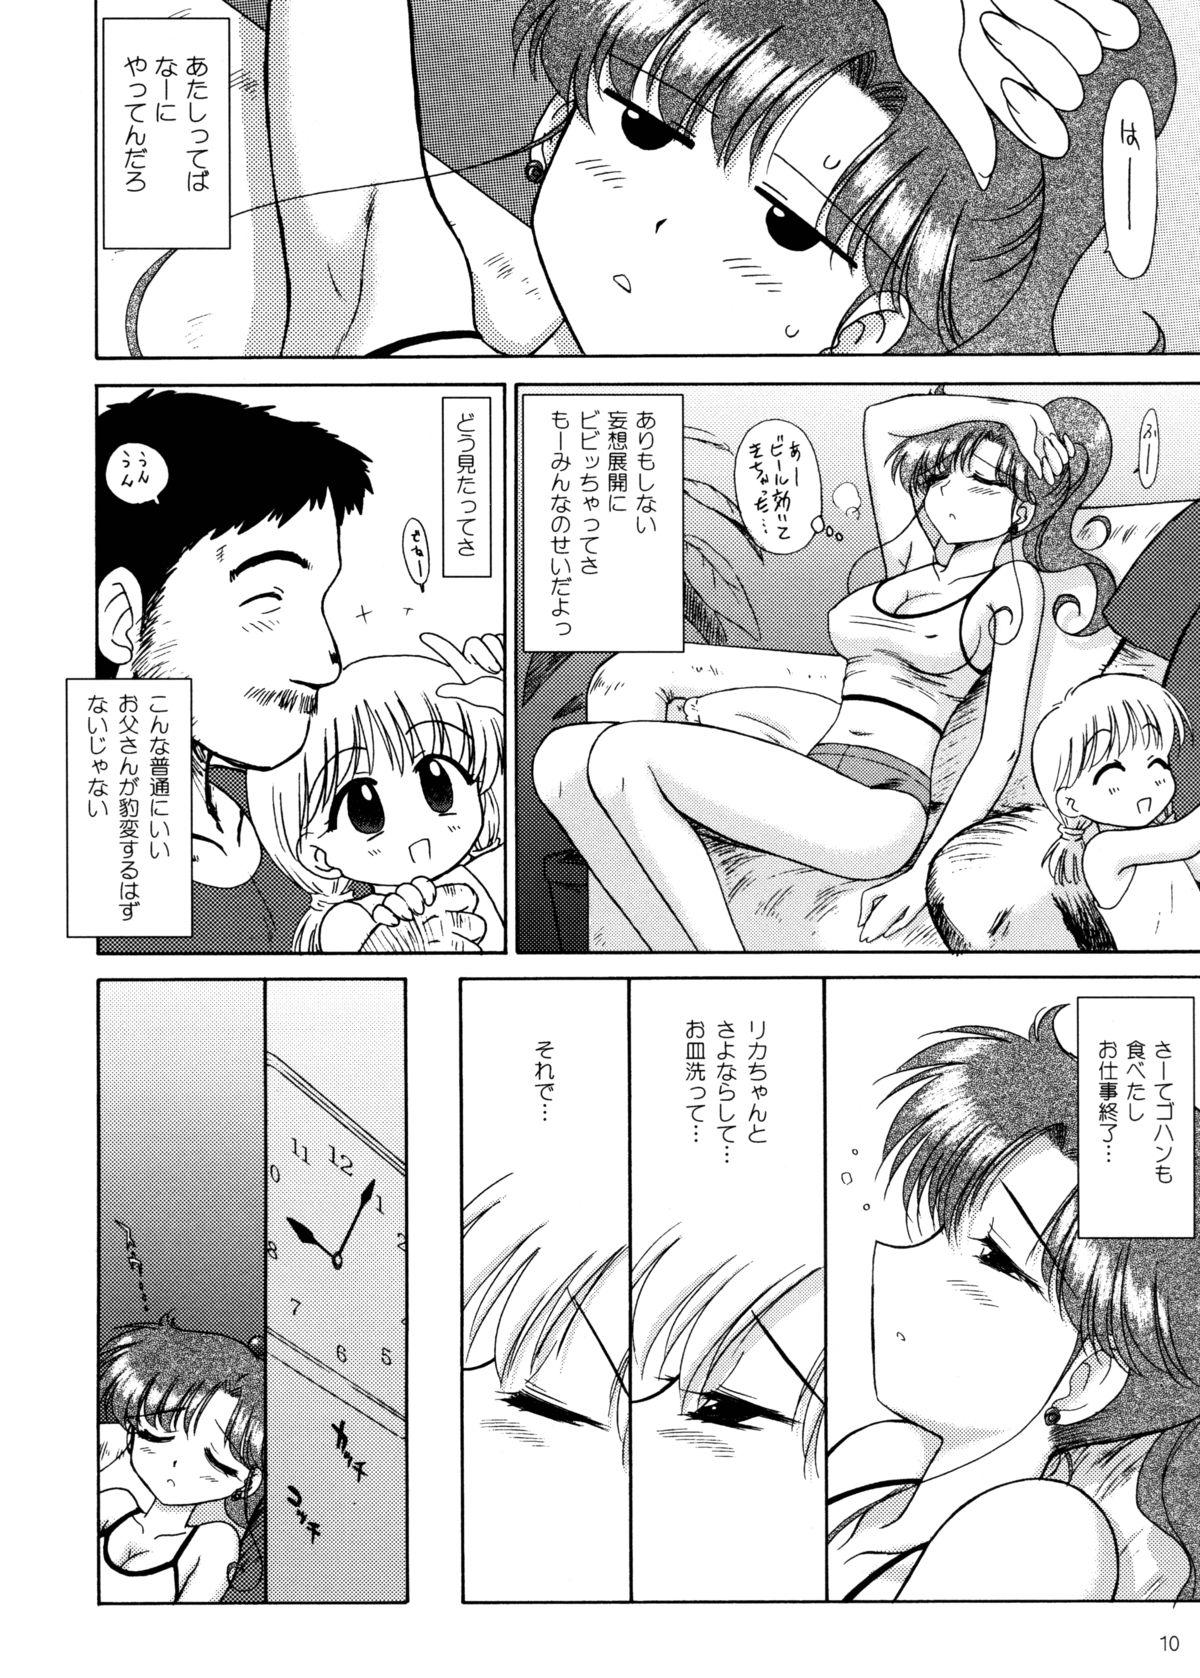 Gay Brownhair In a Silent Way - Sailor moon Anal Licking - Page 9